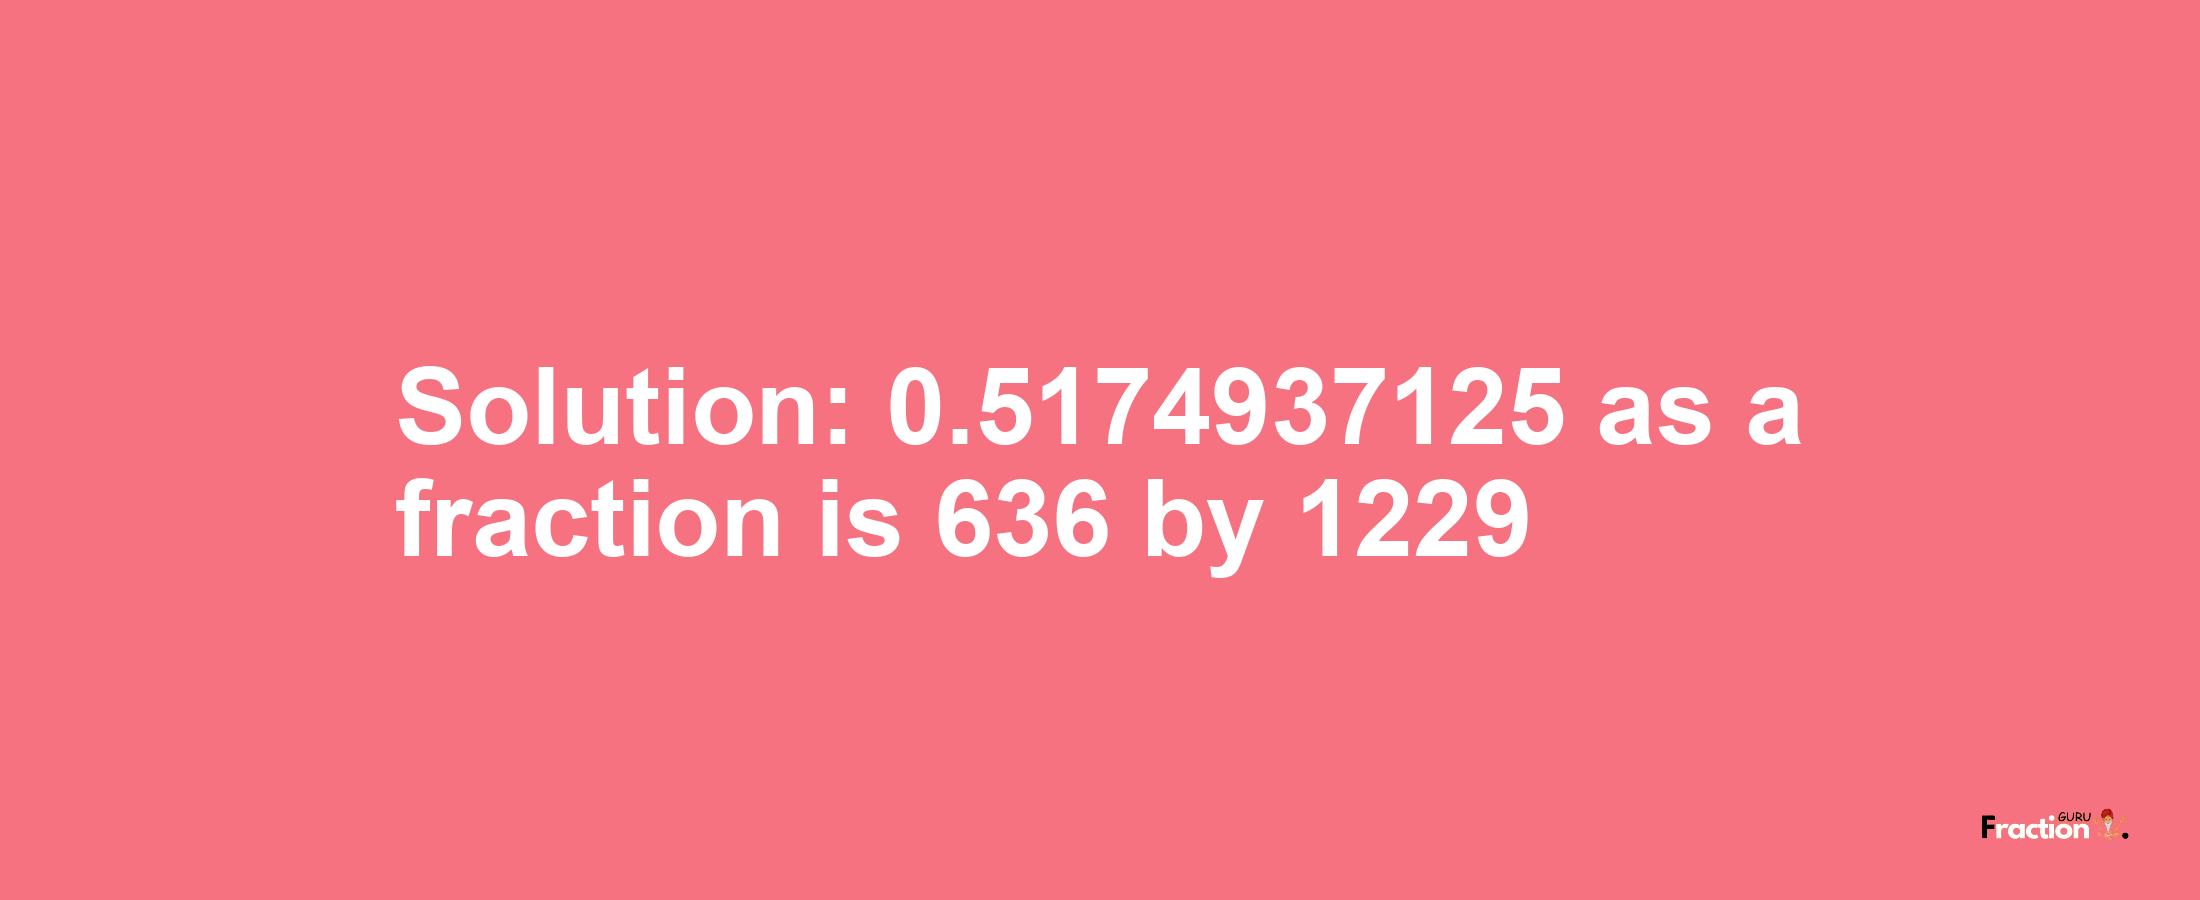 Solution:0.5174937125 as a fraction is 636/1229